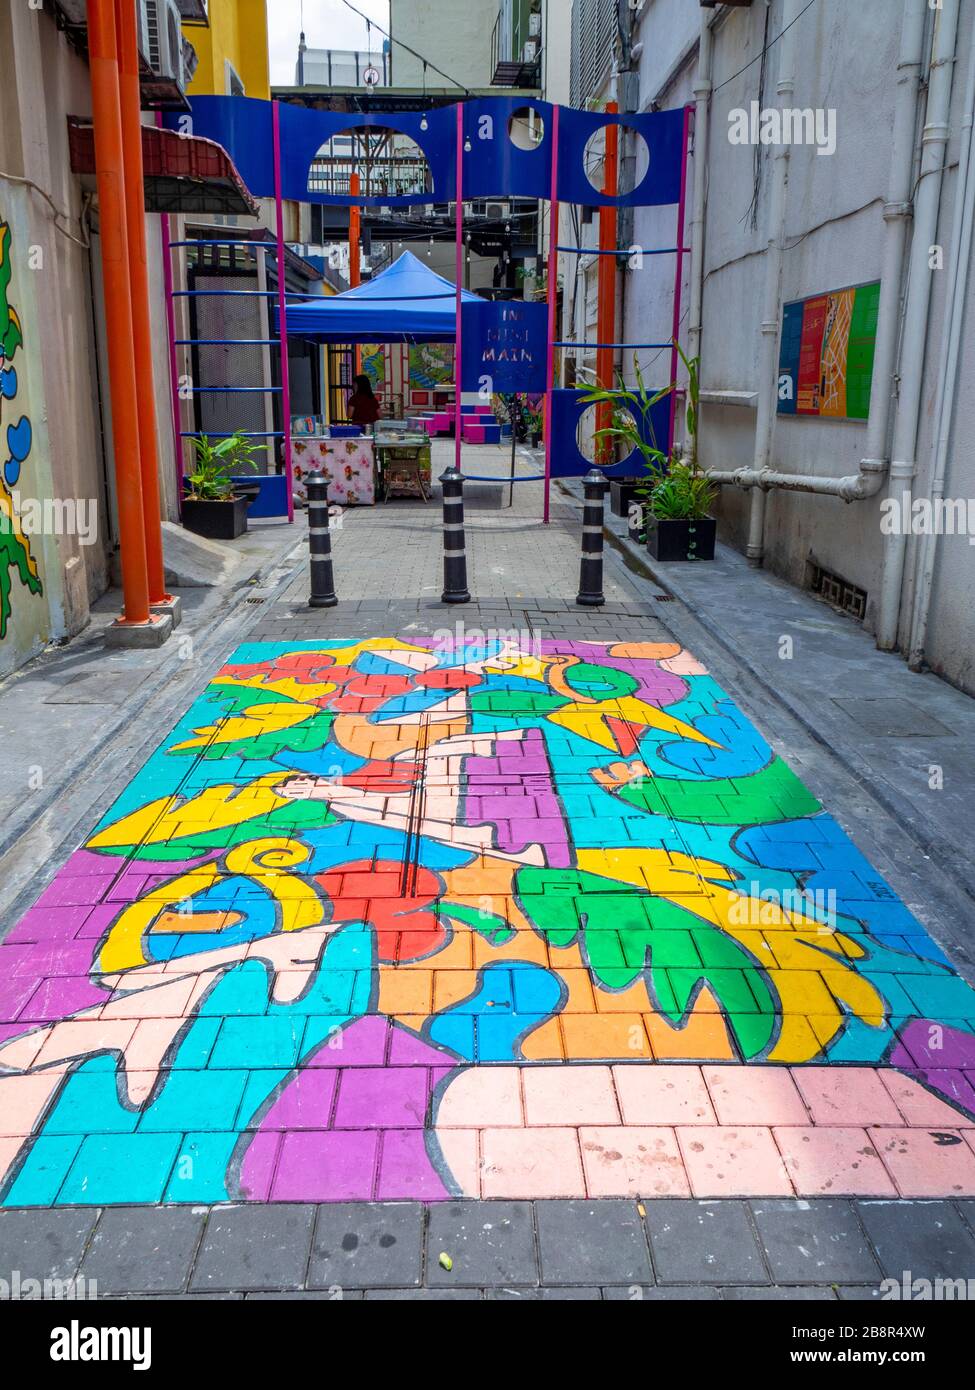 Urbanscapes abstract mural Balance by artist Fritilldea sponsored by Trend Beyond Colours Nippon Paints in a laneway Chinatown Kuala Lumpur Malaysia. Stock Photo